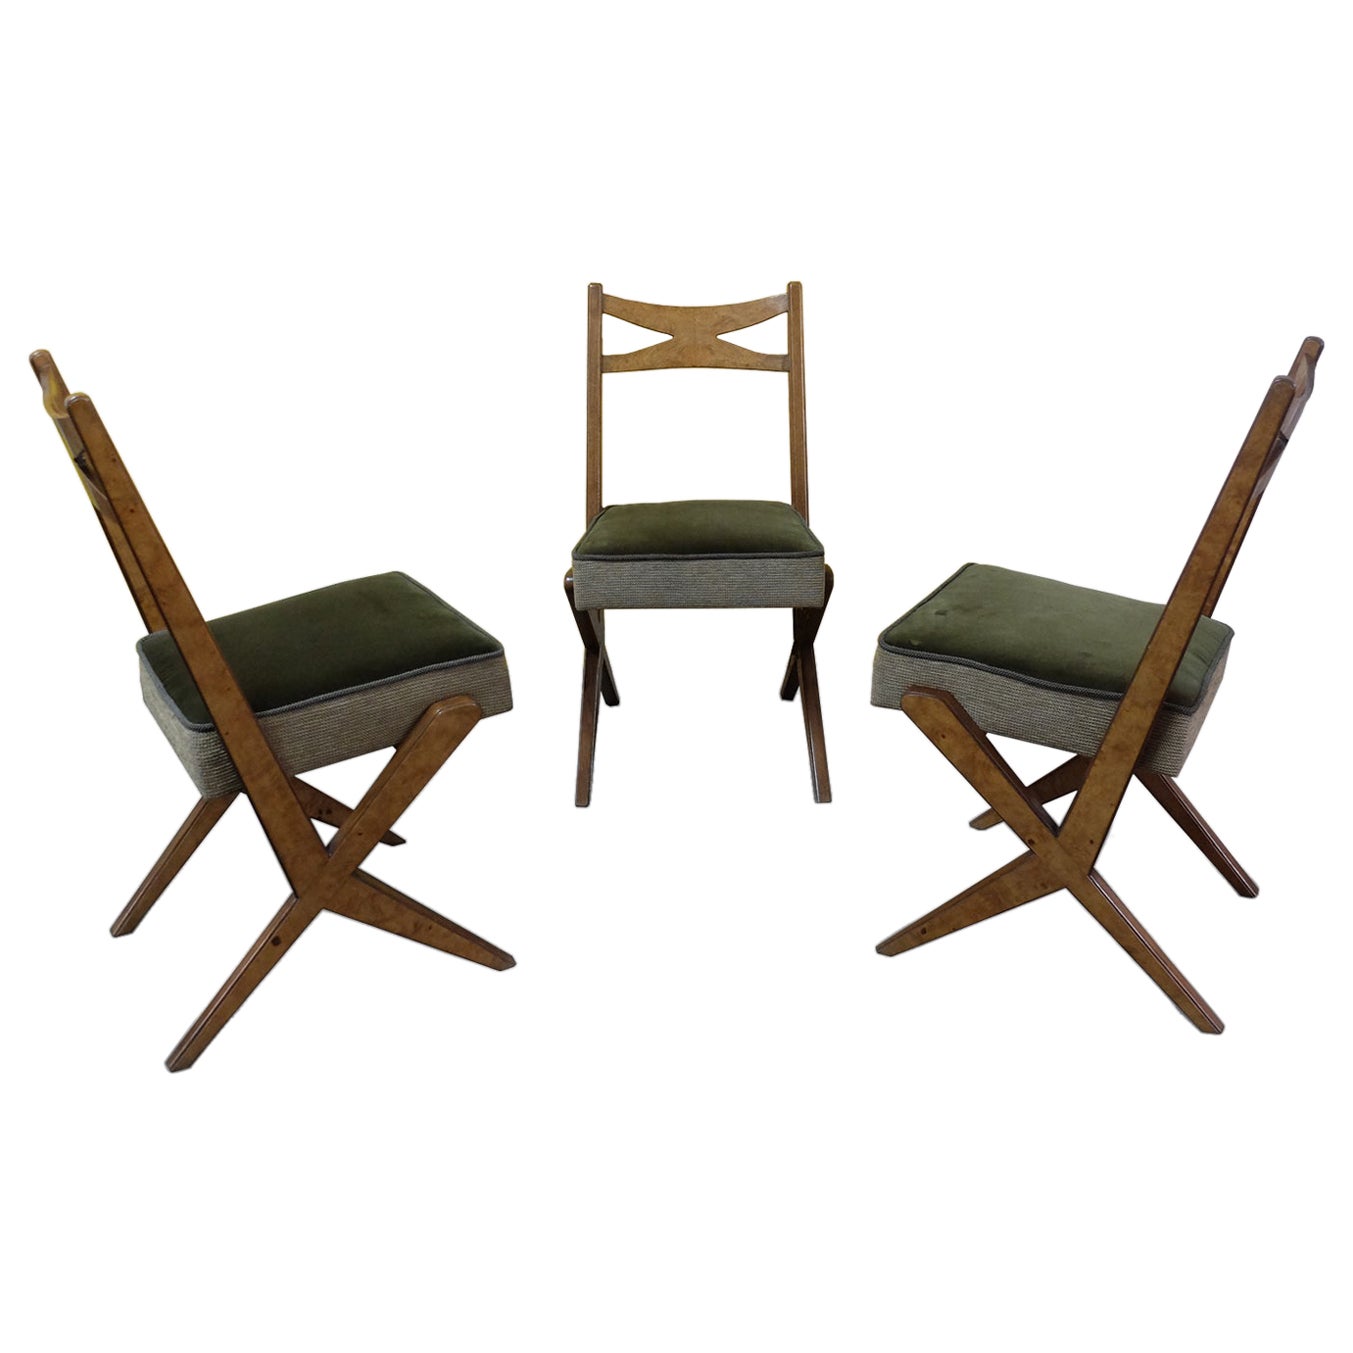 BBPR, rare set of 3 Italian Mid-century Modern Wooden and Velour Chairs, 1948 For Sale